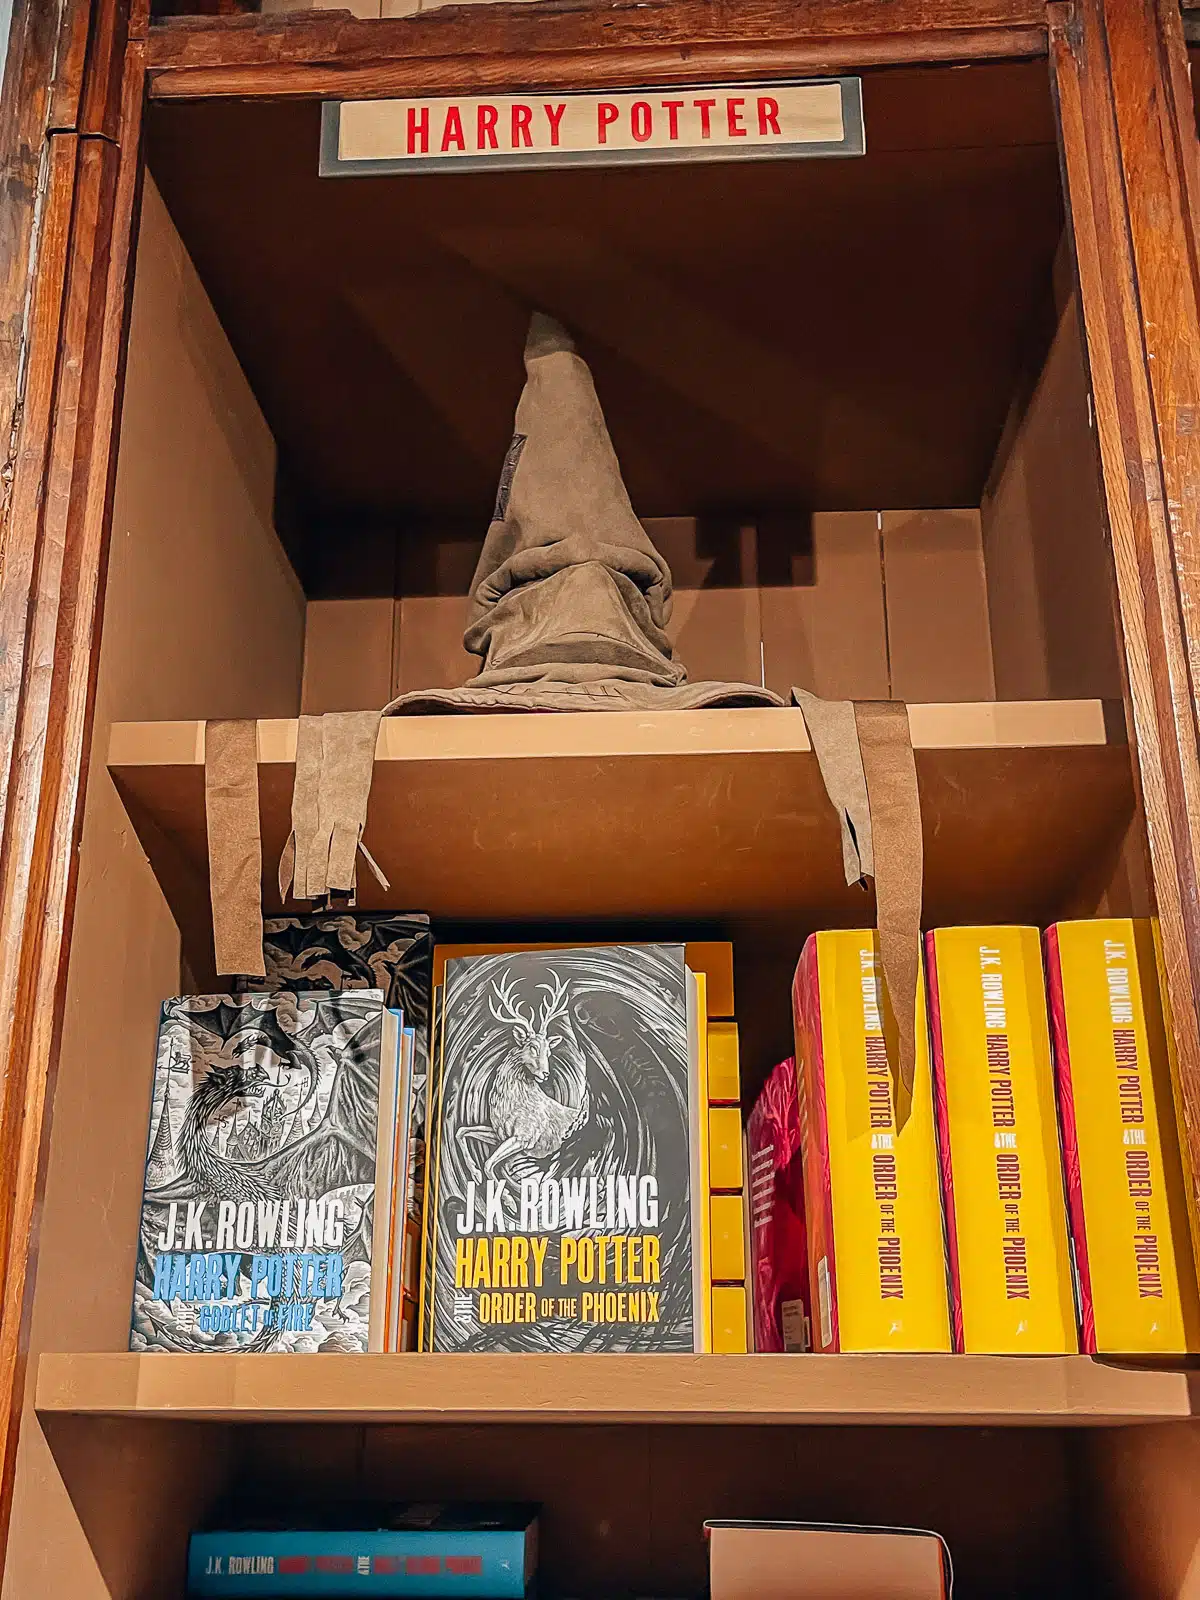 Livraria Lello Harry Potter Bookestore, by travel blogger What The Fab